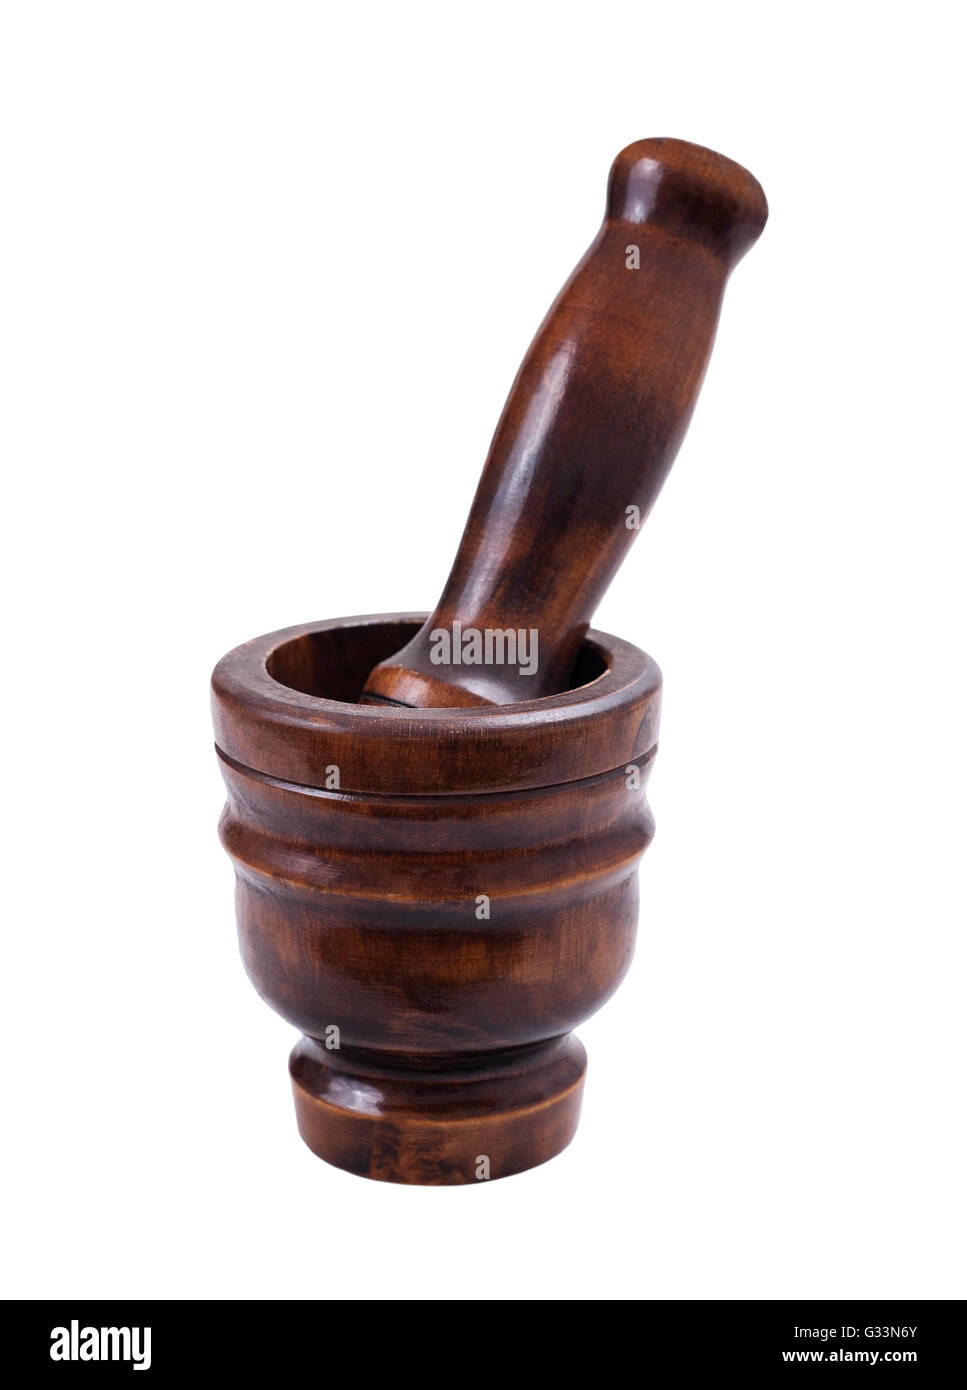 Wooden mortar and pestle on white background Stock Photo